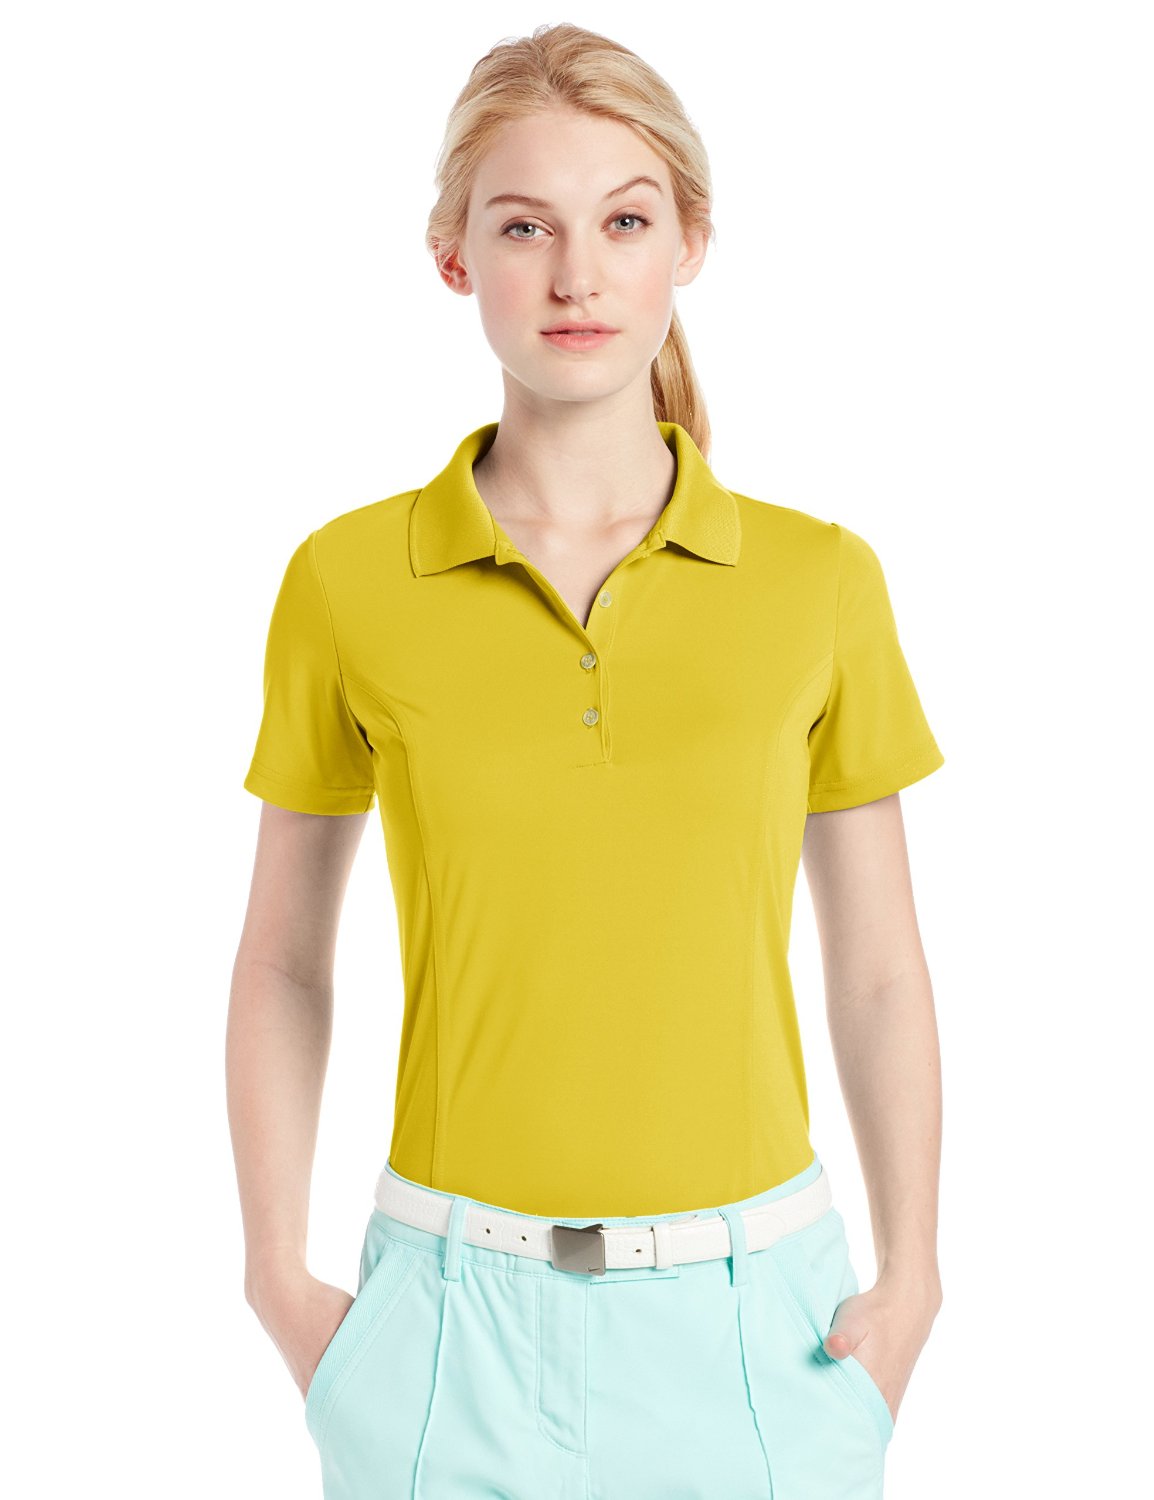 Womens Adidas Puremotion Solid Jersey Golf Polo Shirts